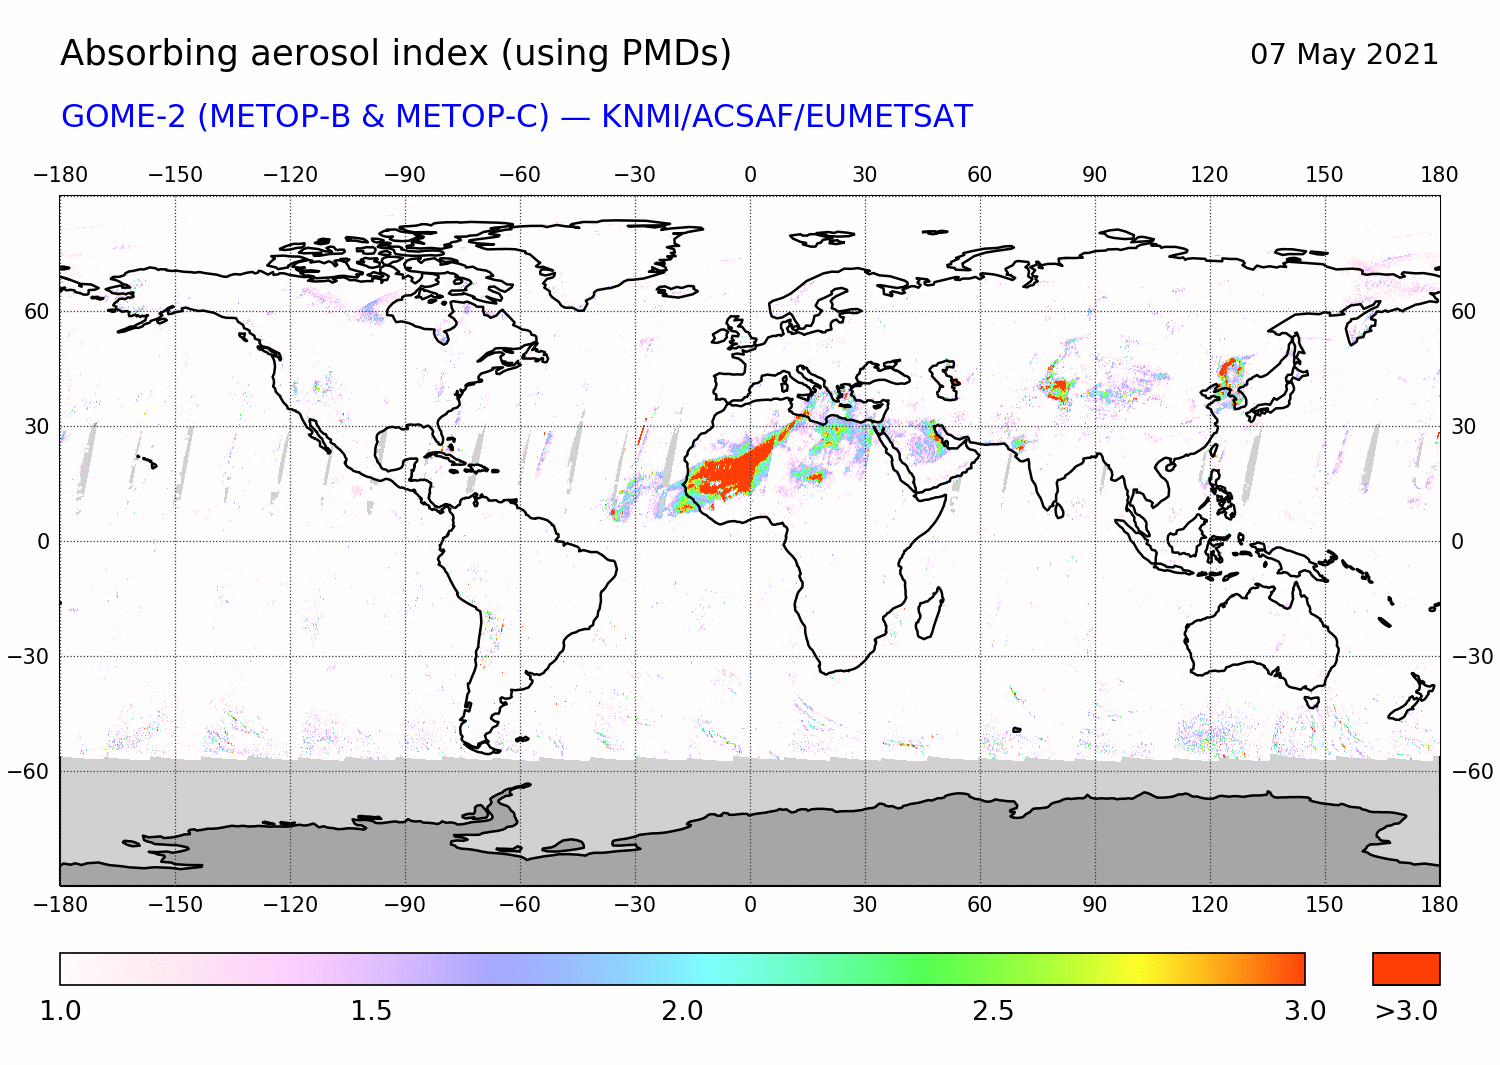 GOME-2 - Absorbing aerosol index of 07 May 2021